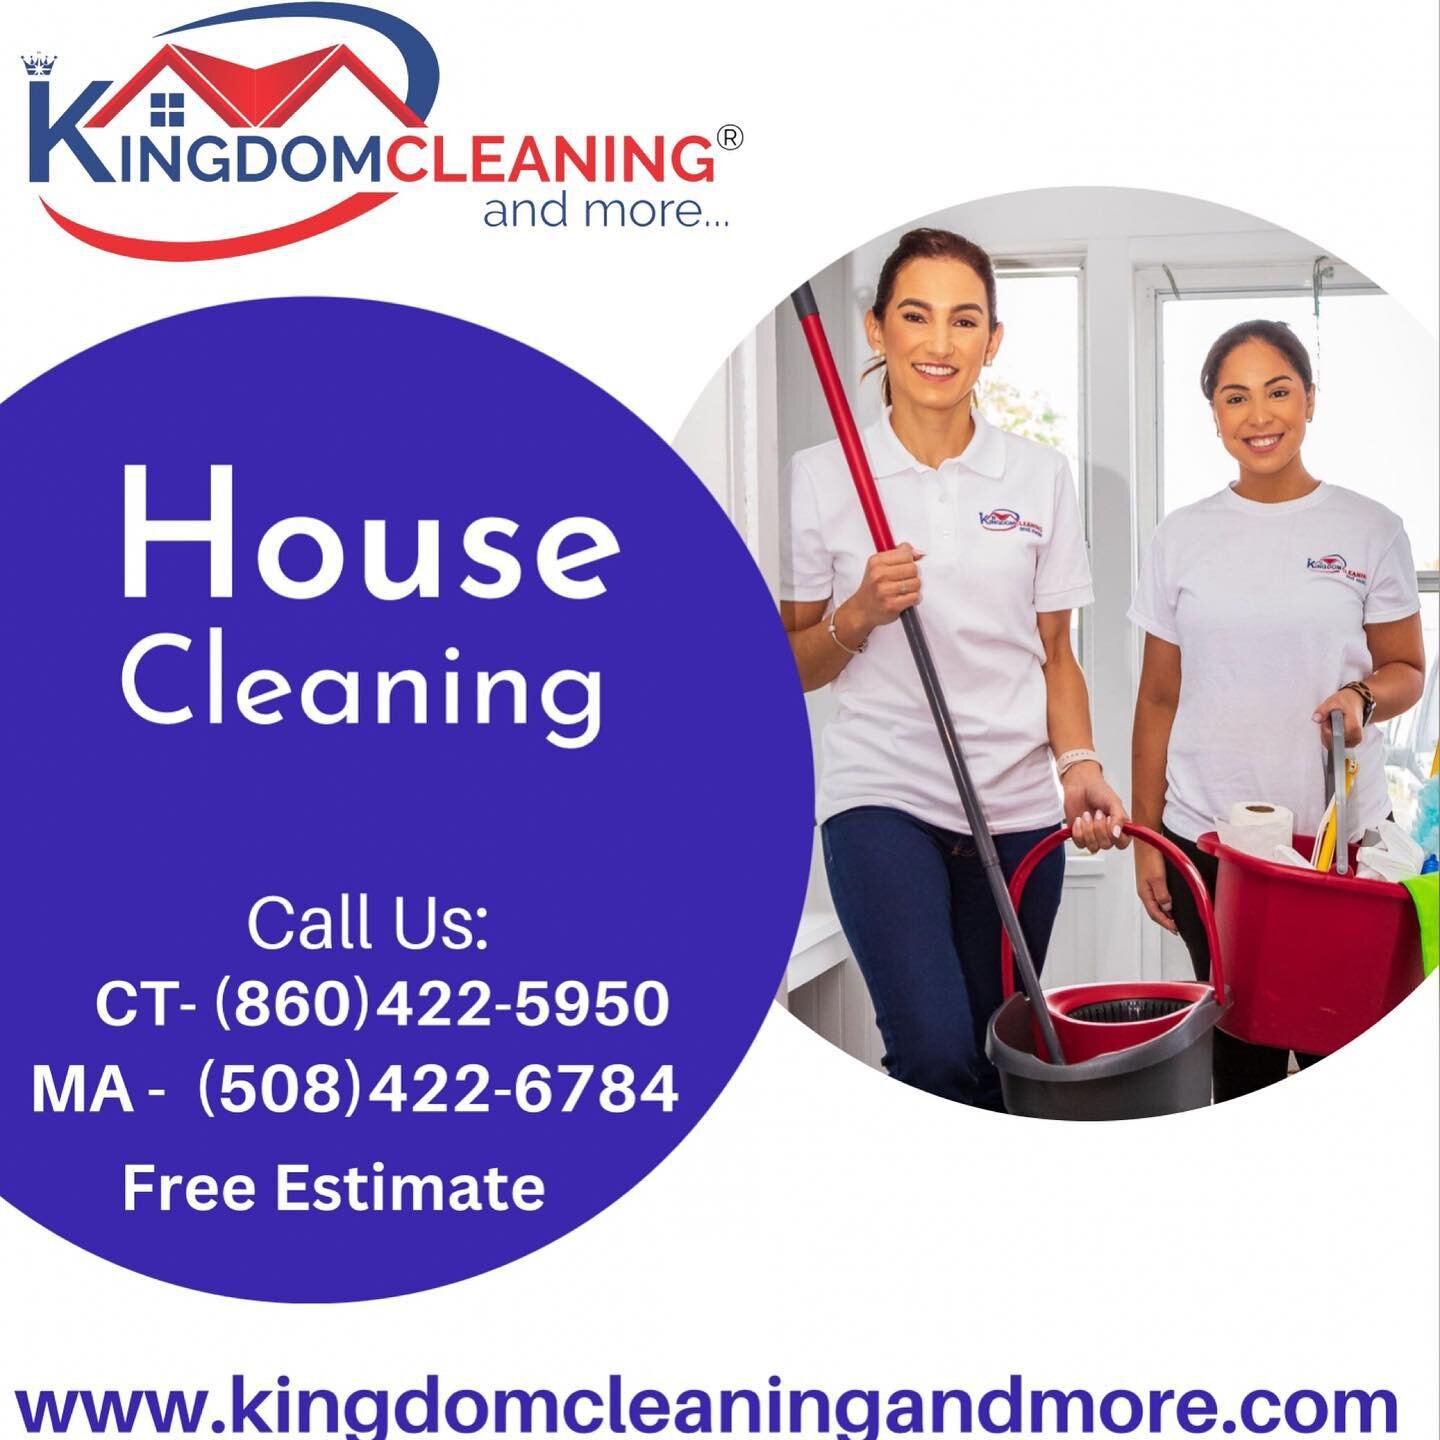 Overwhelmed?
Let us take care of your cleaning!

✅Call (860)422-5950 CT Location
(508)422-6784 MA Location
To get a quote:
✅Aproved Quote
✅Book
✅We Clean
✅You Relax
✅Easy online payment

Enjoy a clean home without lifting a finger, our lovely staff w